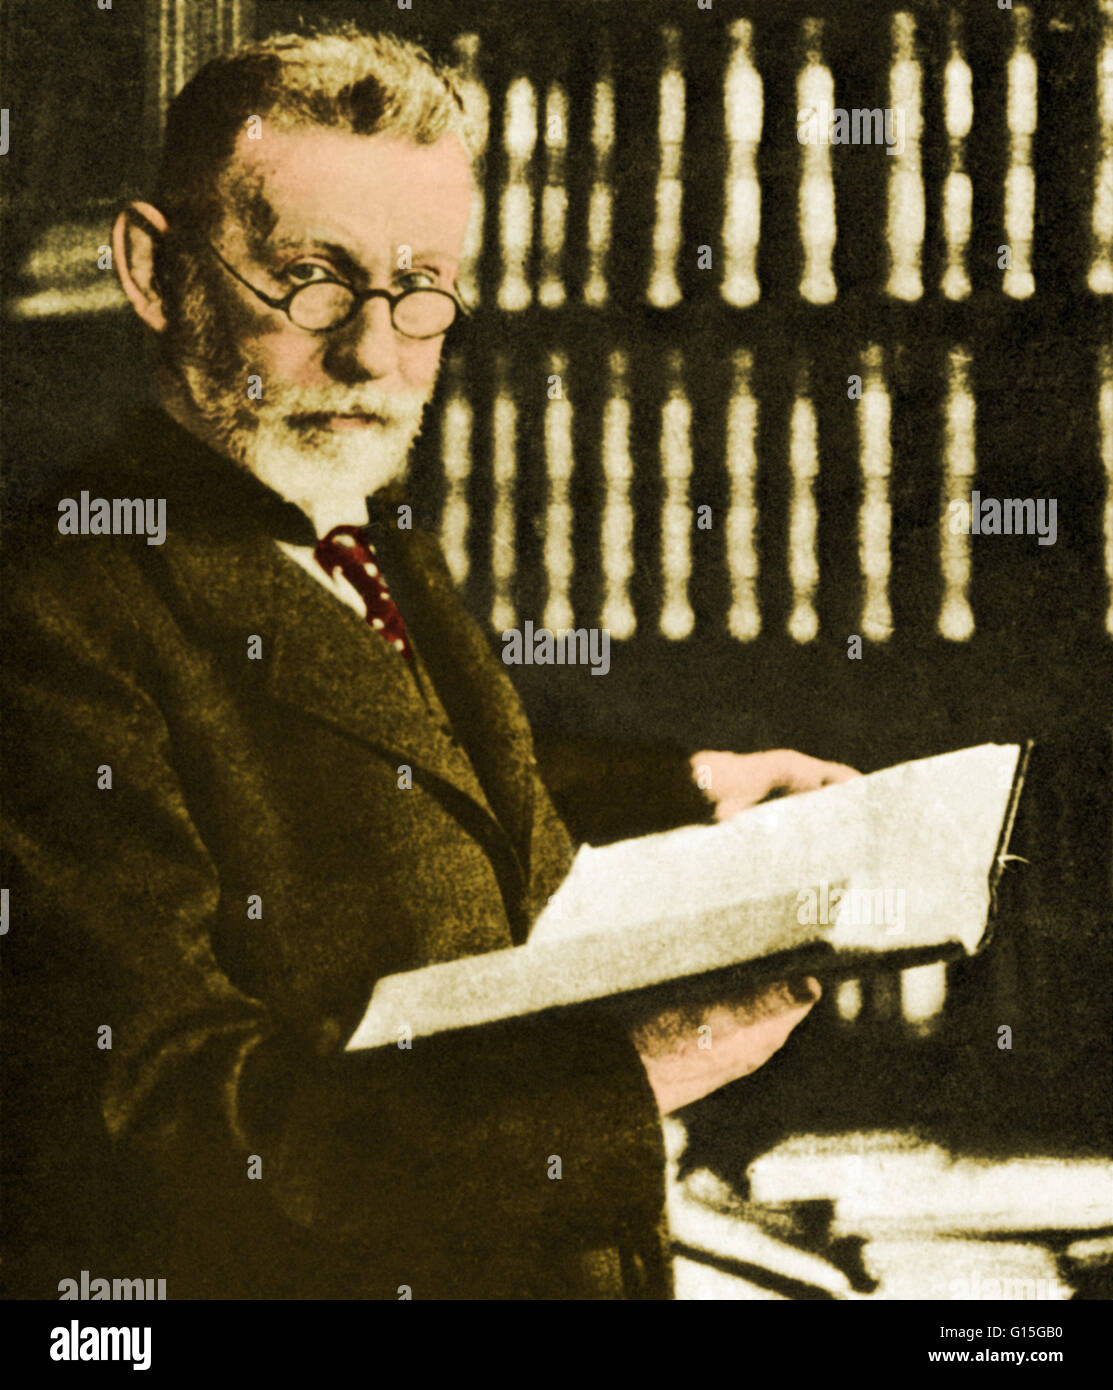 Paul Ehrlich (March 14, 1854-August 20, 1915) was a German physician and scientist who worked in the fields of hematology, immunology, and chemotherapy. The methods he developed for staining tissue made it possible to distinguish between different type of Stock Photo